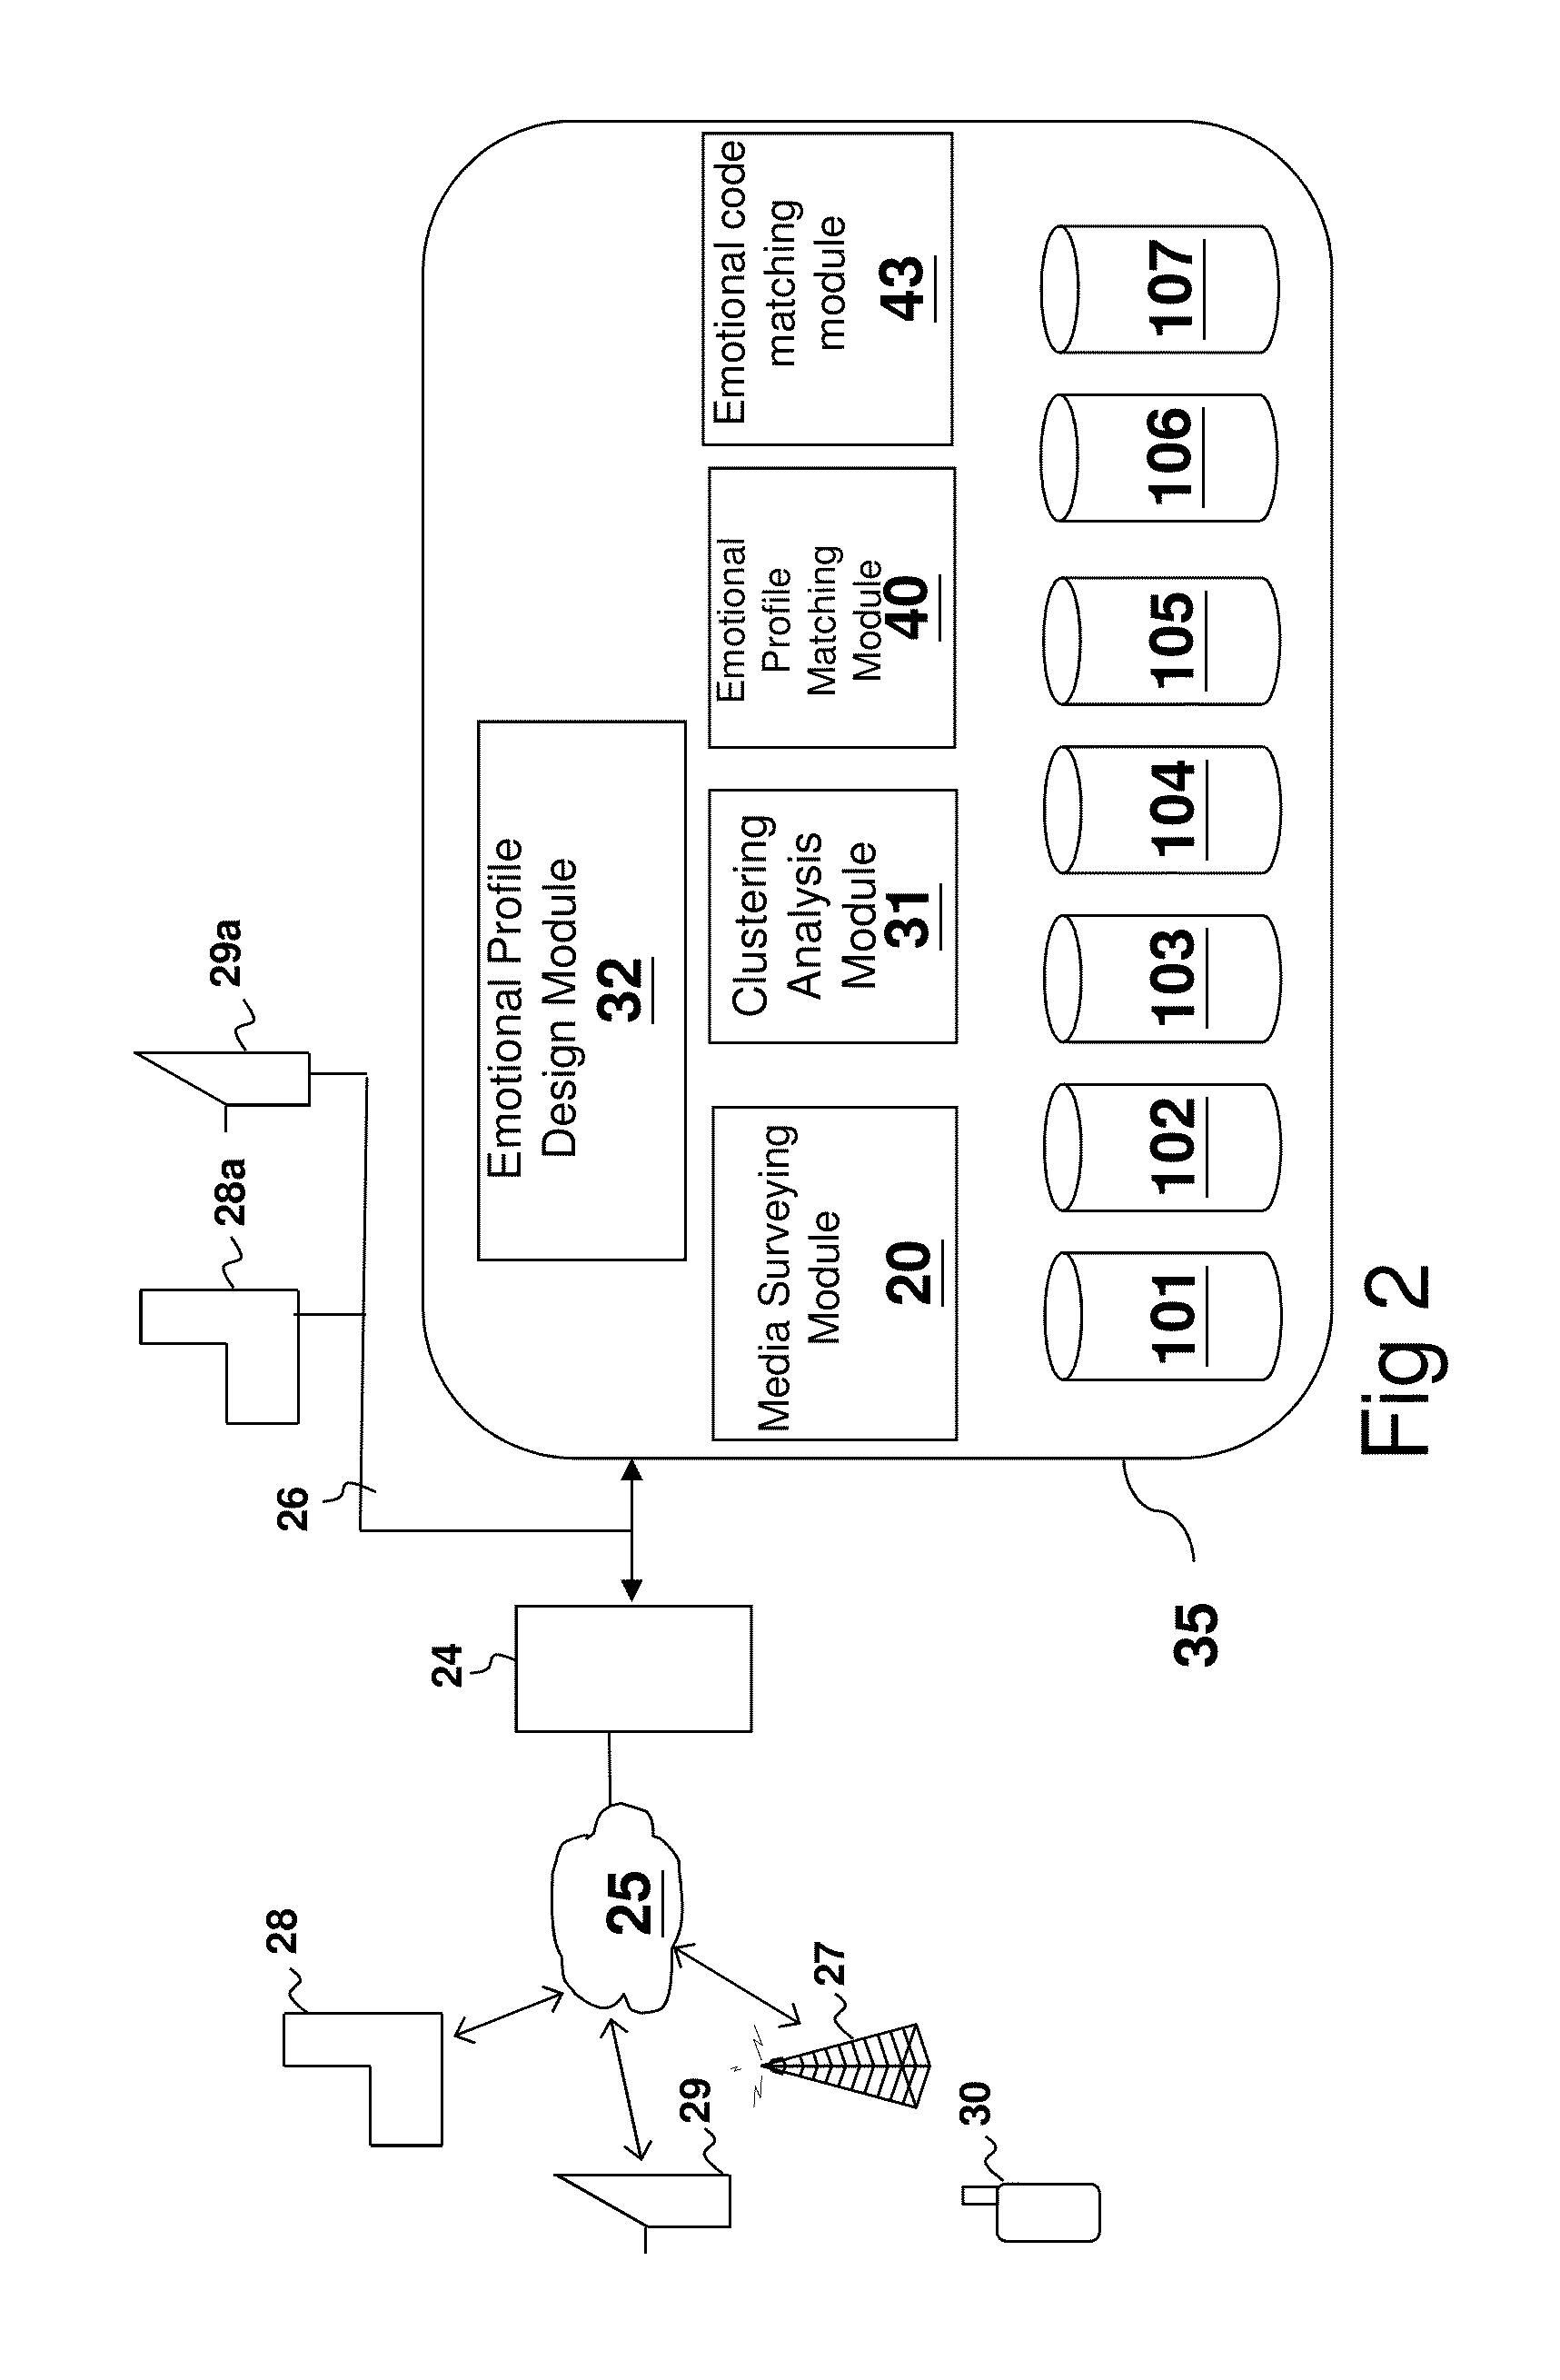 System and method of segmenting and tagging entities based on profile matching using a multi-media survey